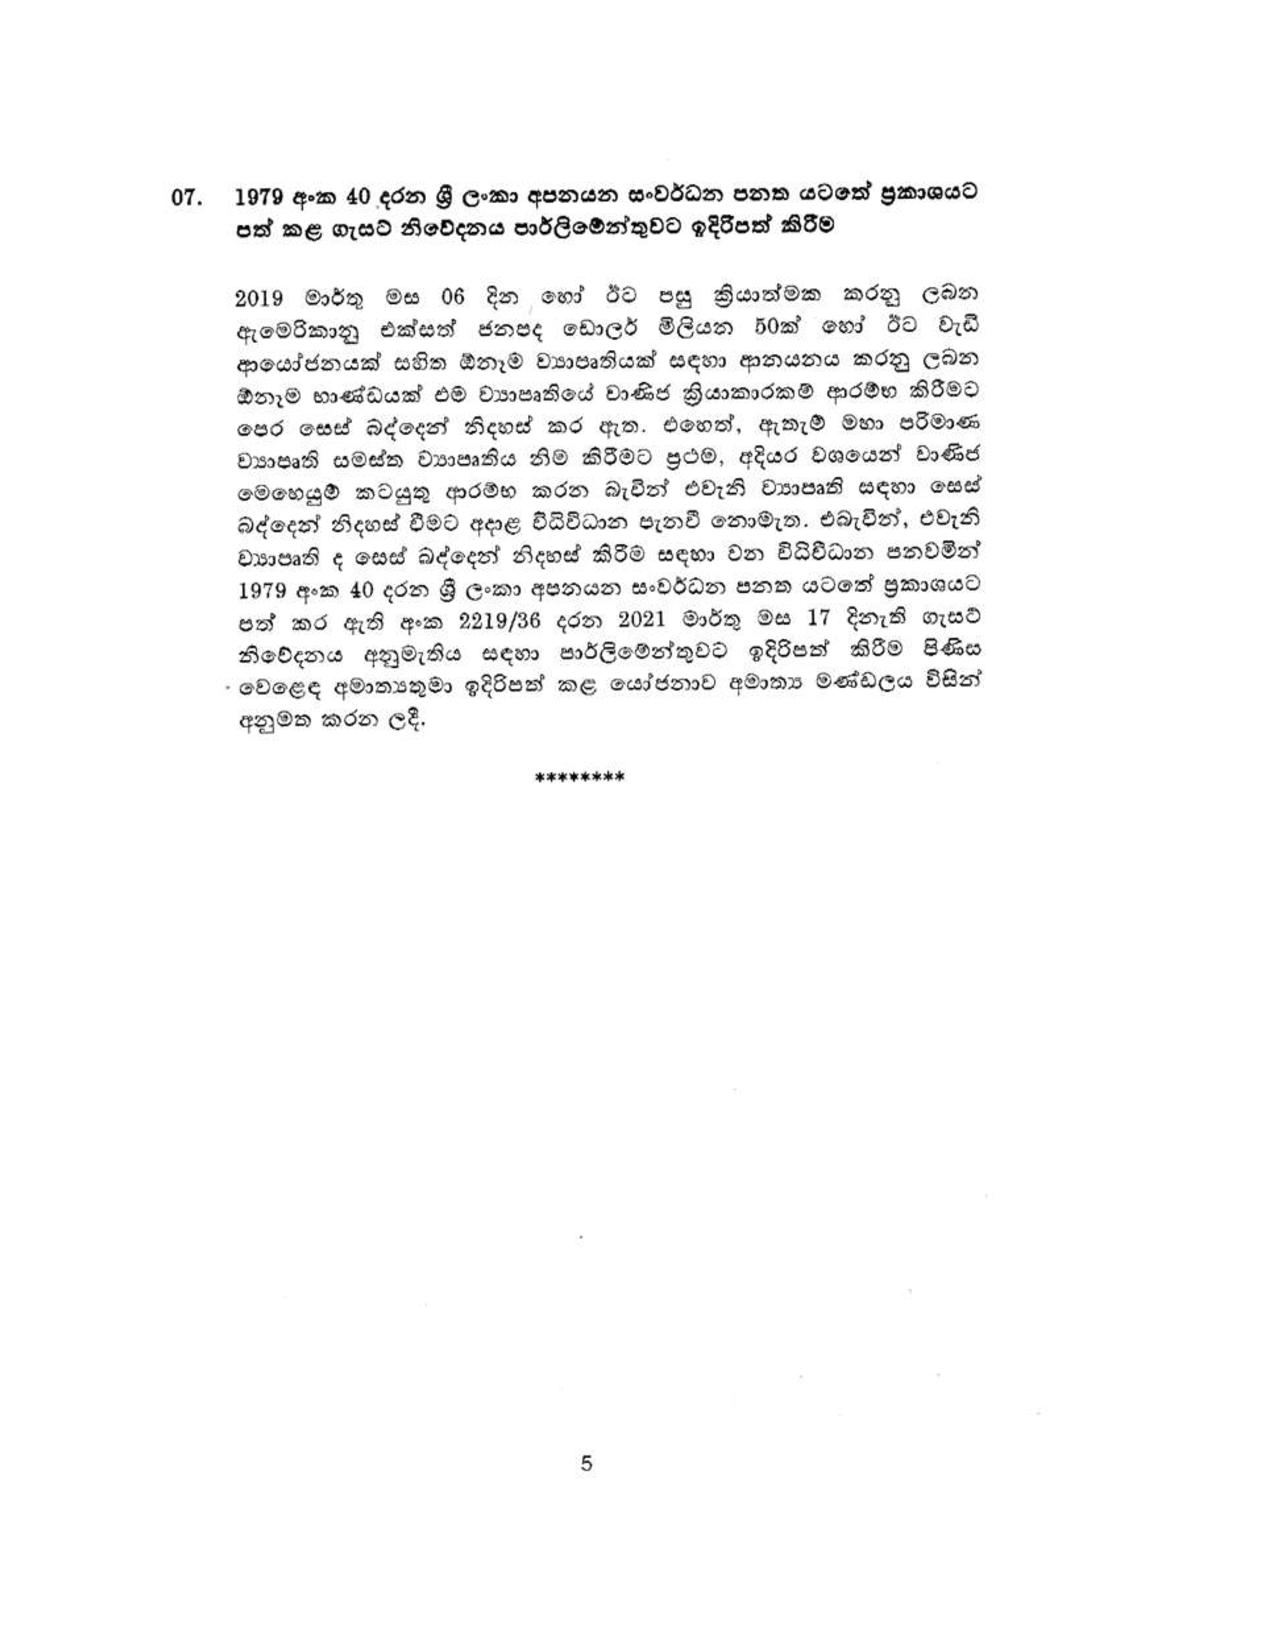 Cabinet Decision on 10.05.2021 Sinhala page 005